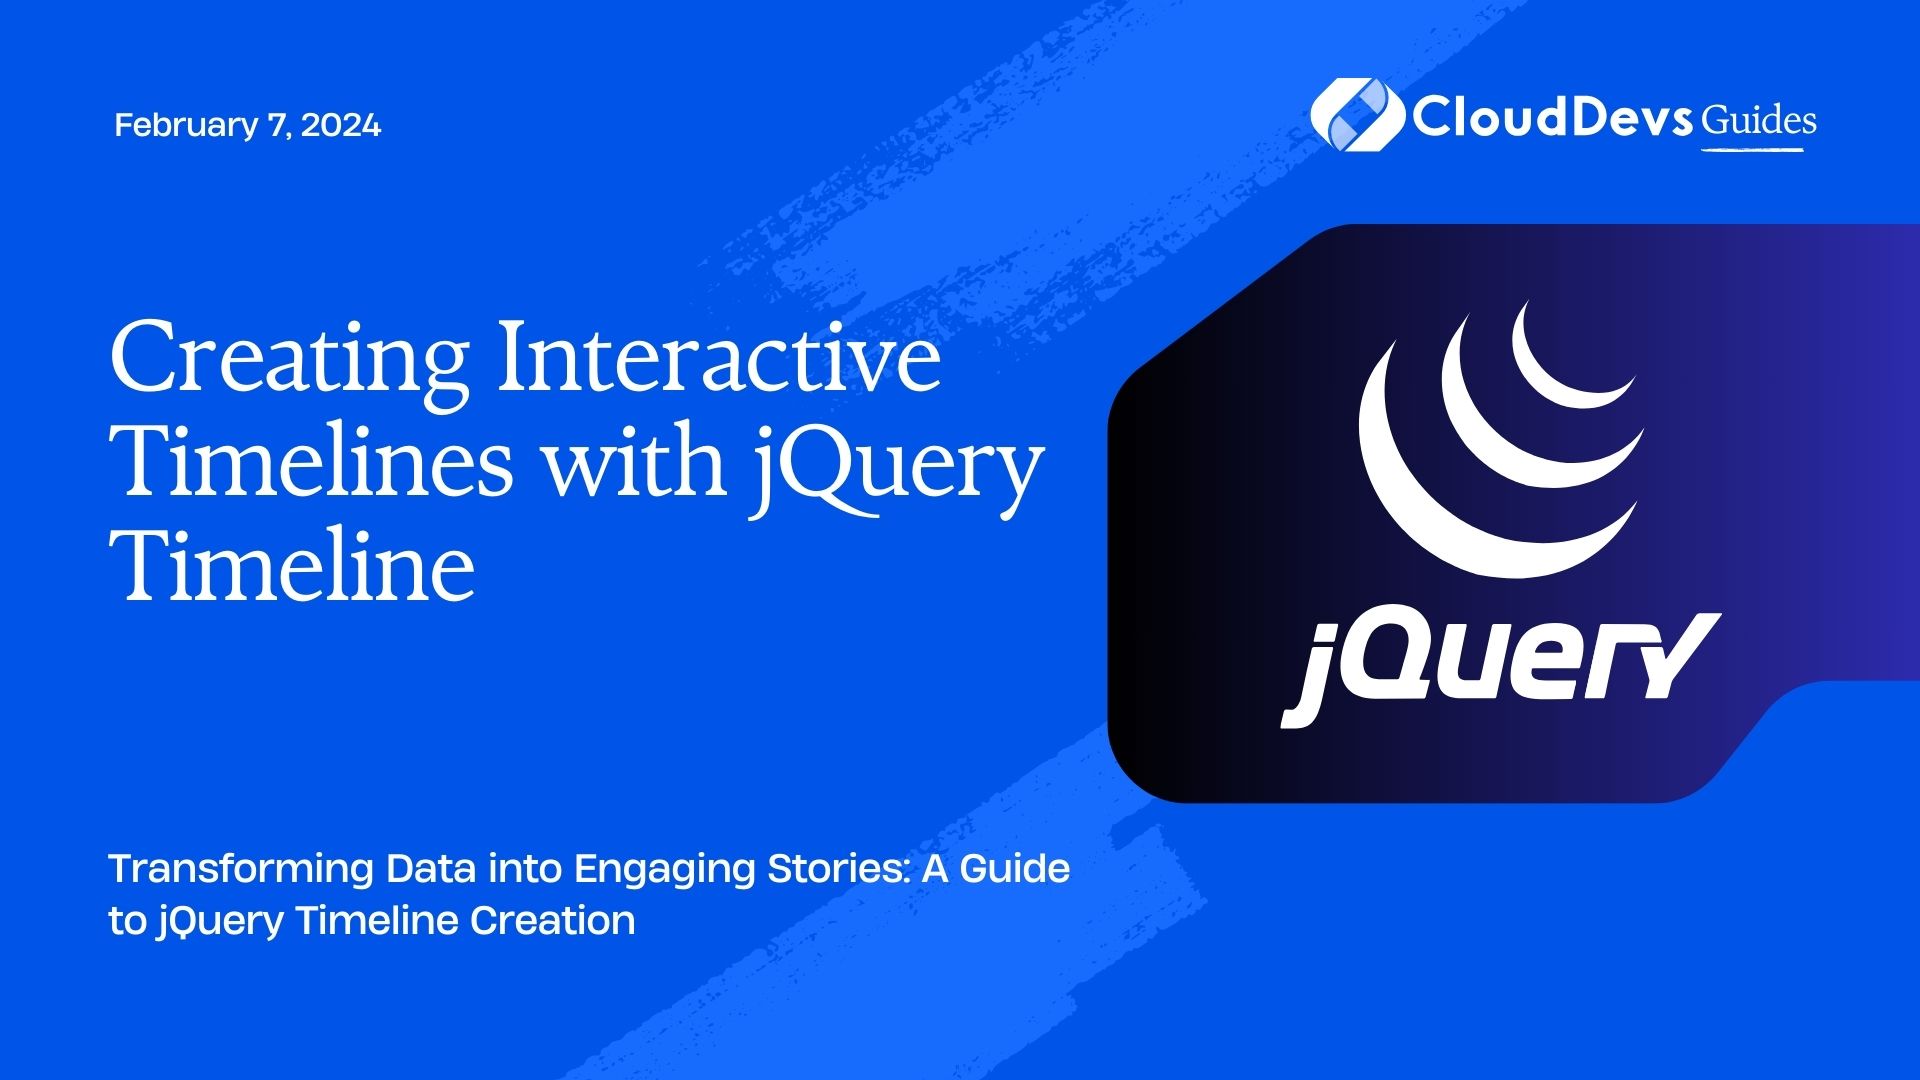 Creating Interactive Timelines with jQuery Timeline